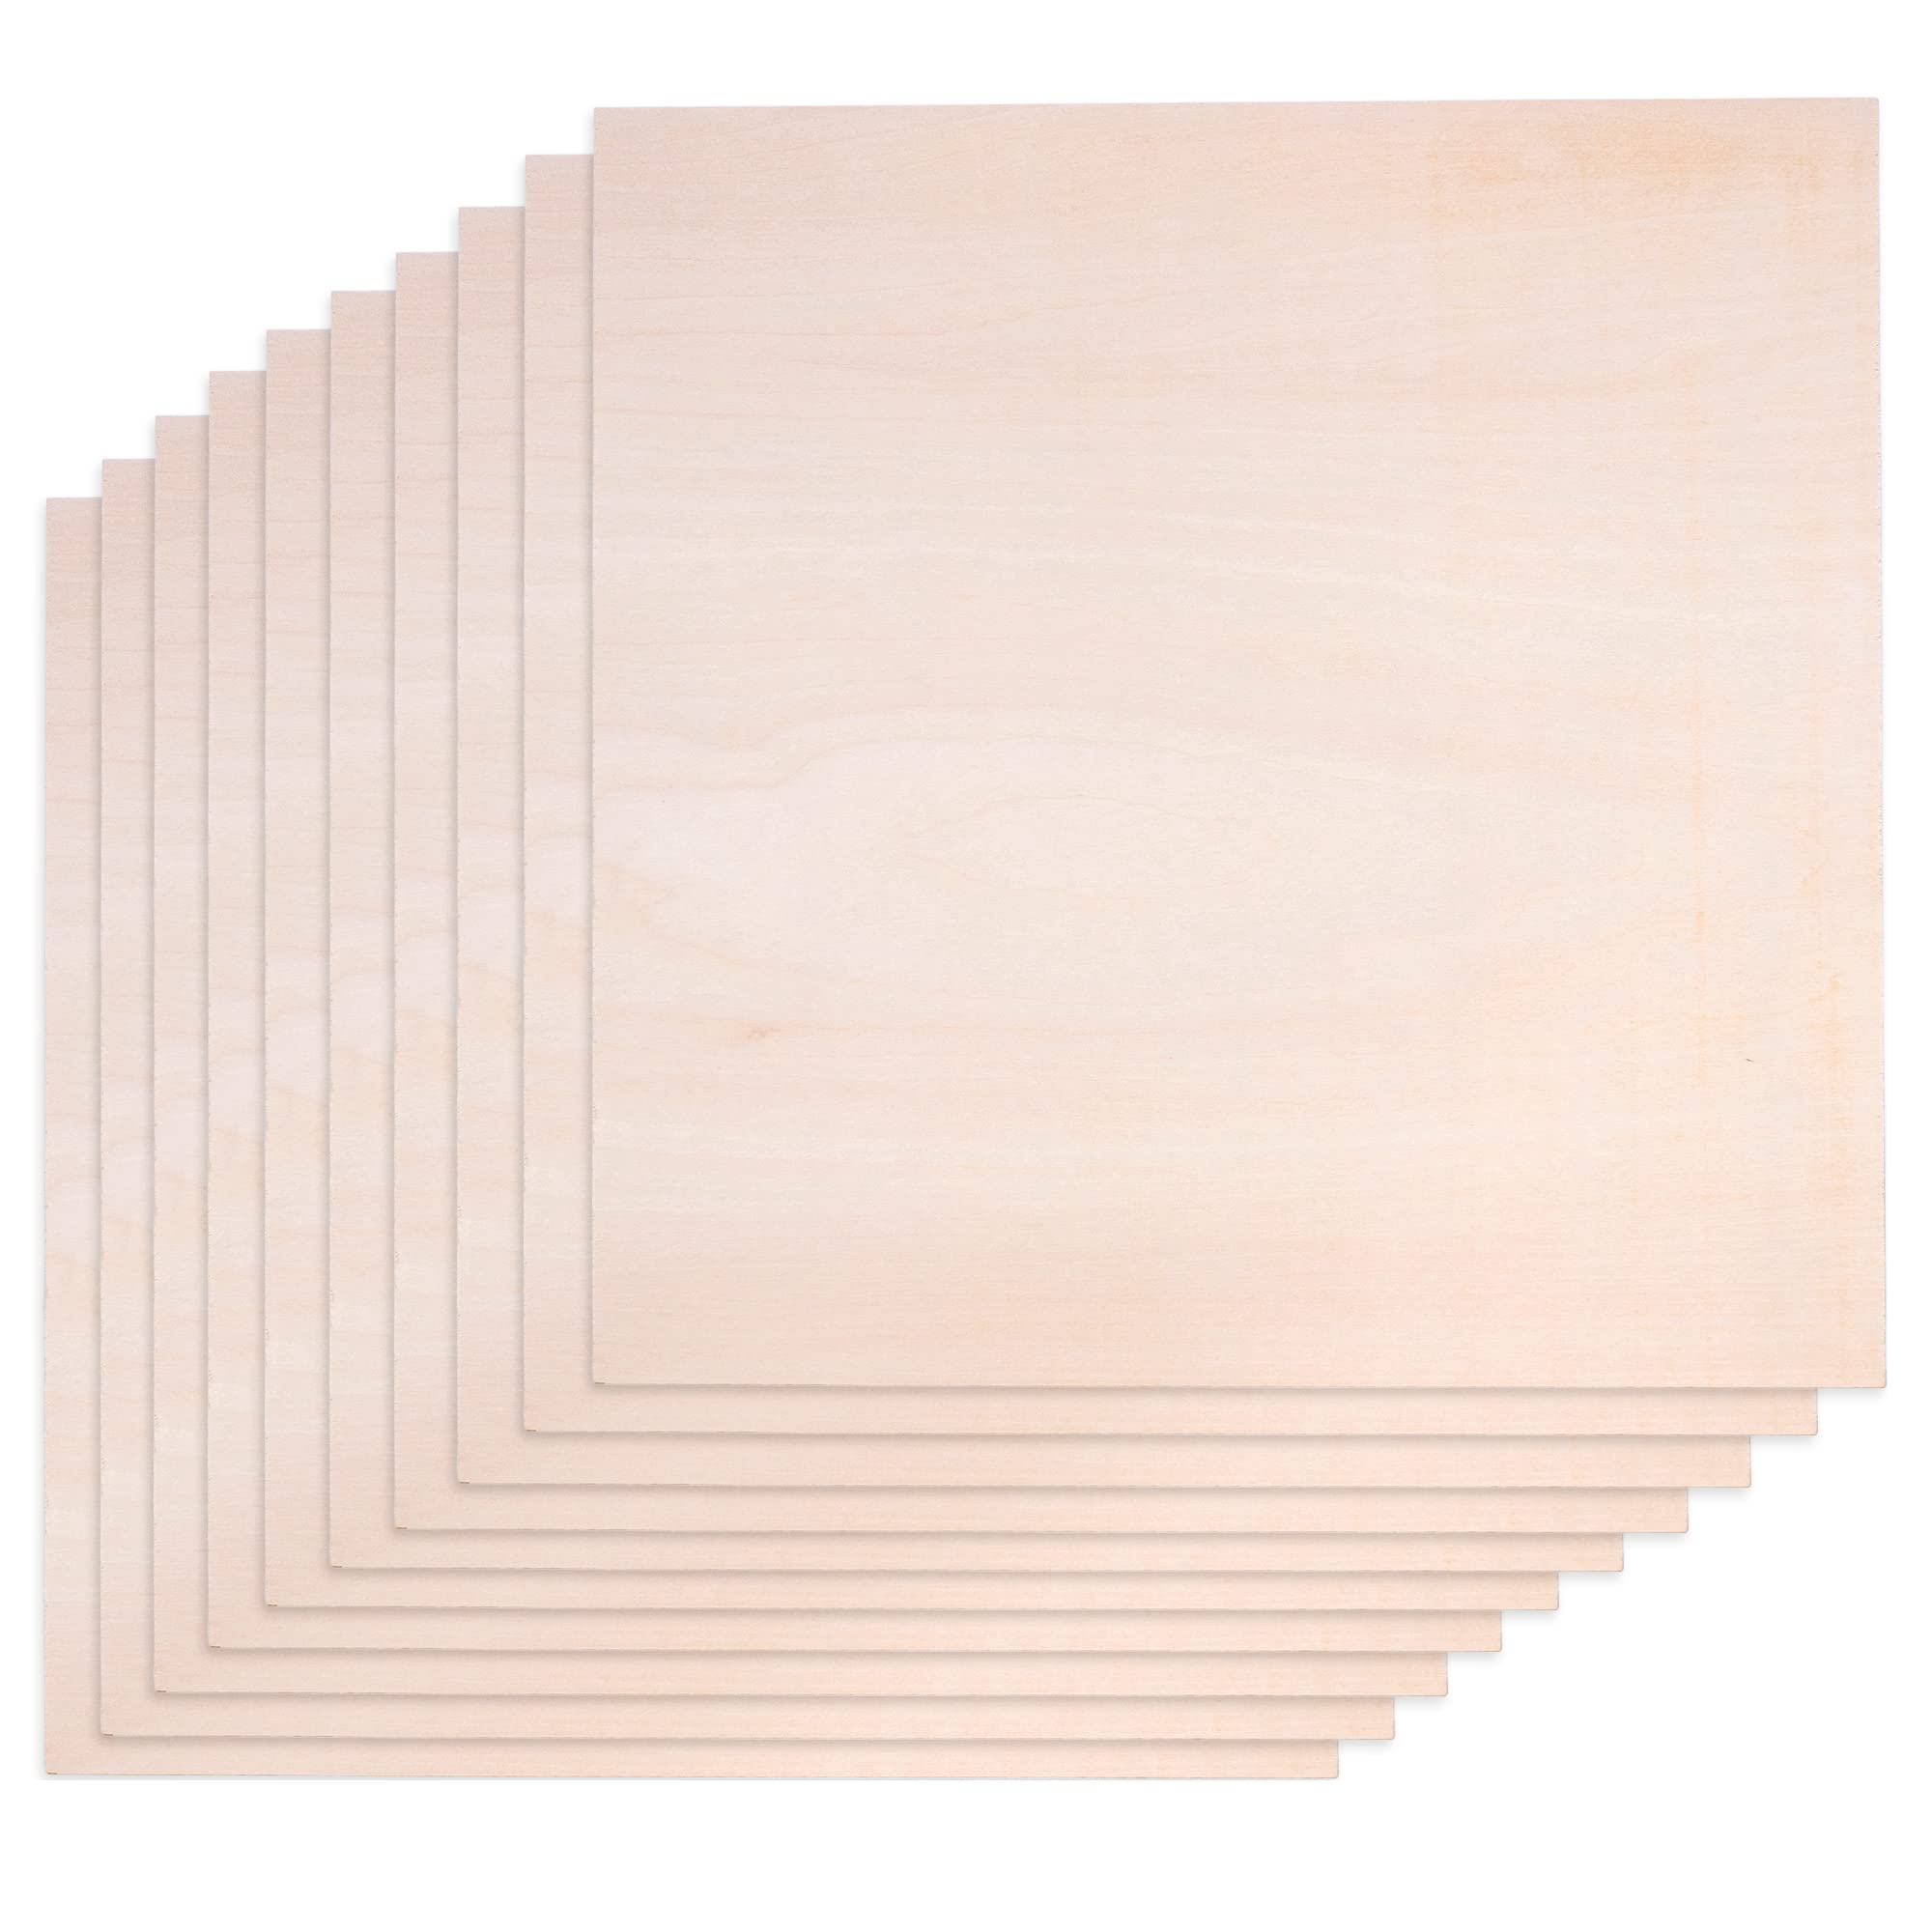 Solid Wood Sheets - 6 x 12